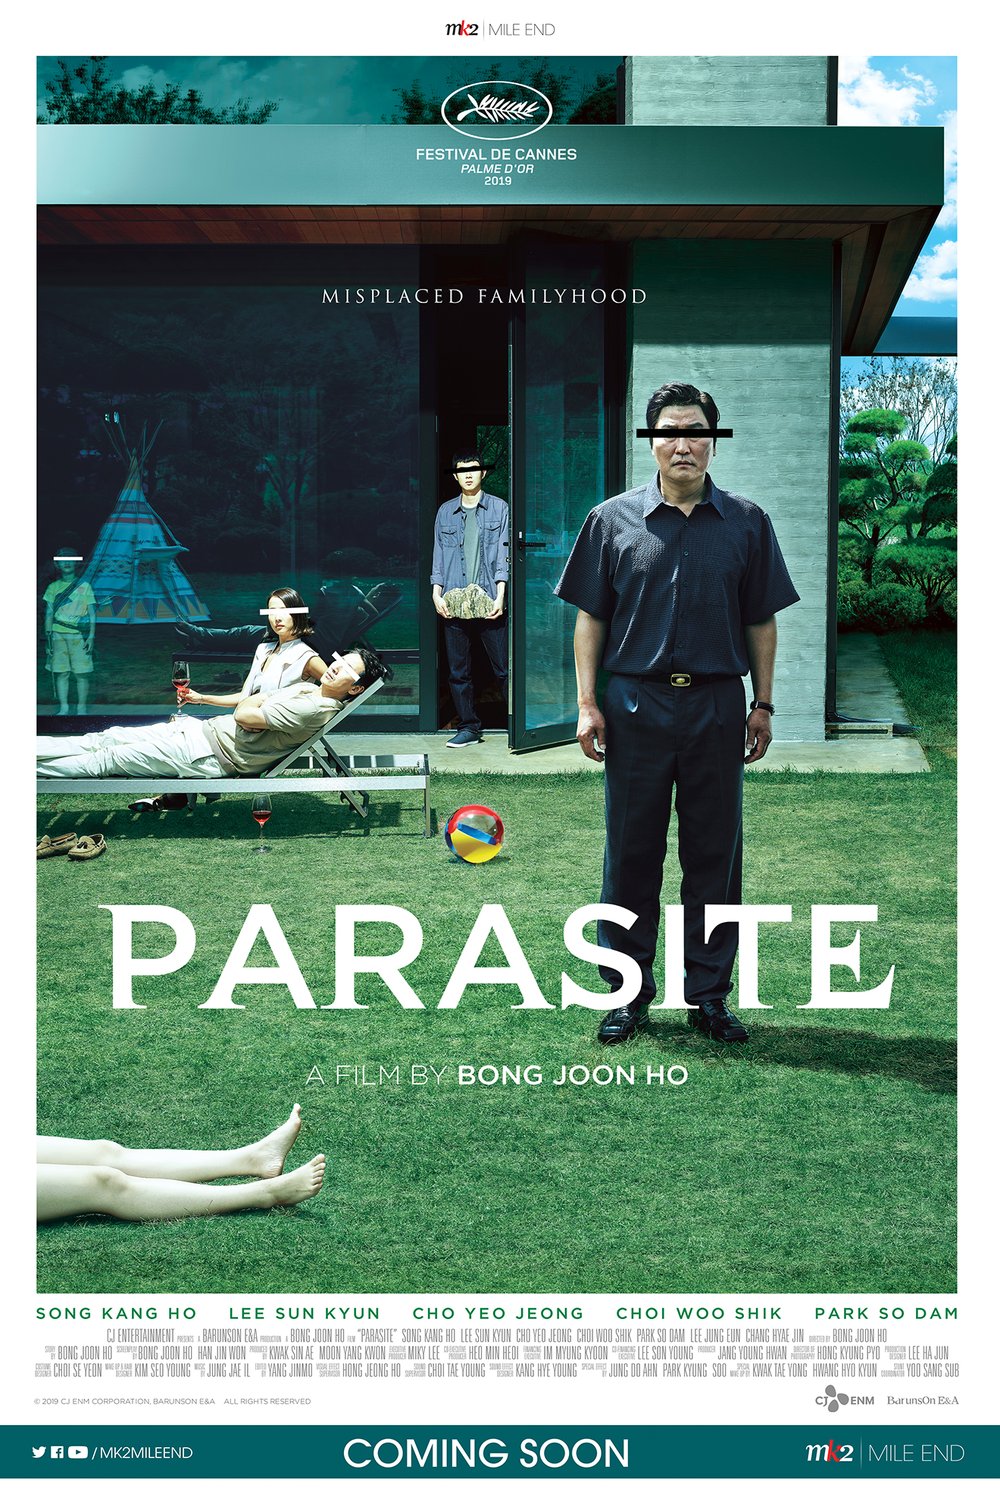 Poster of the movie Parasite